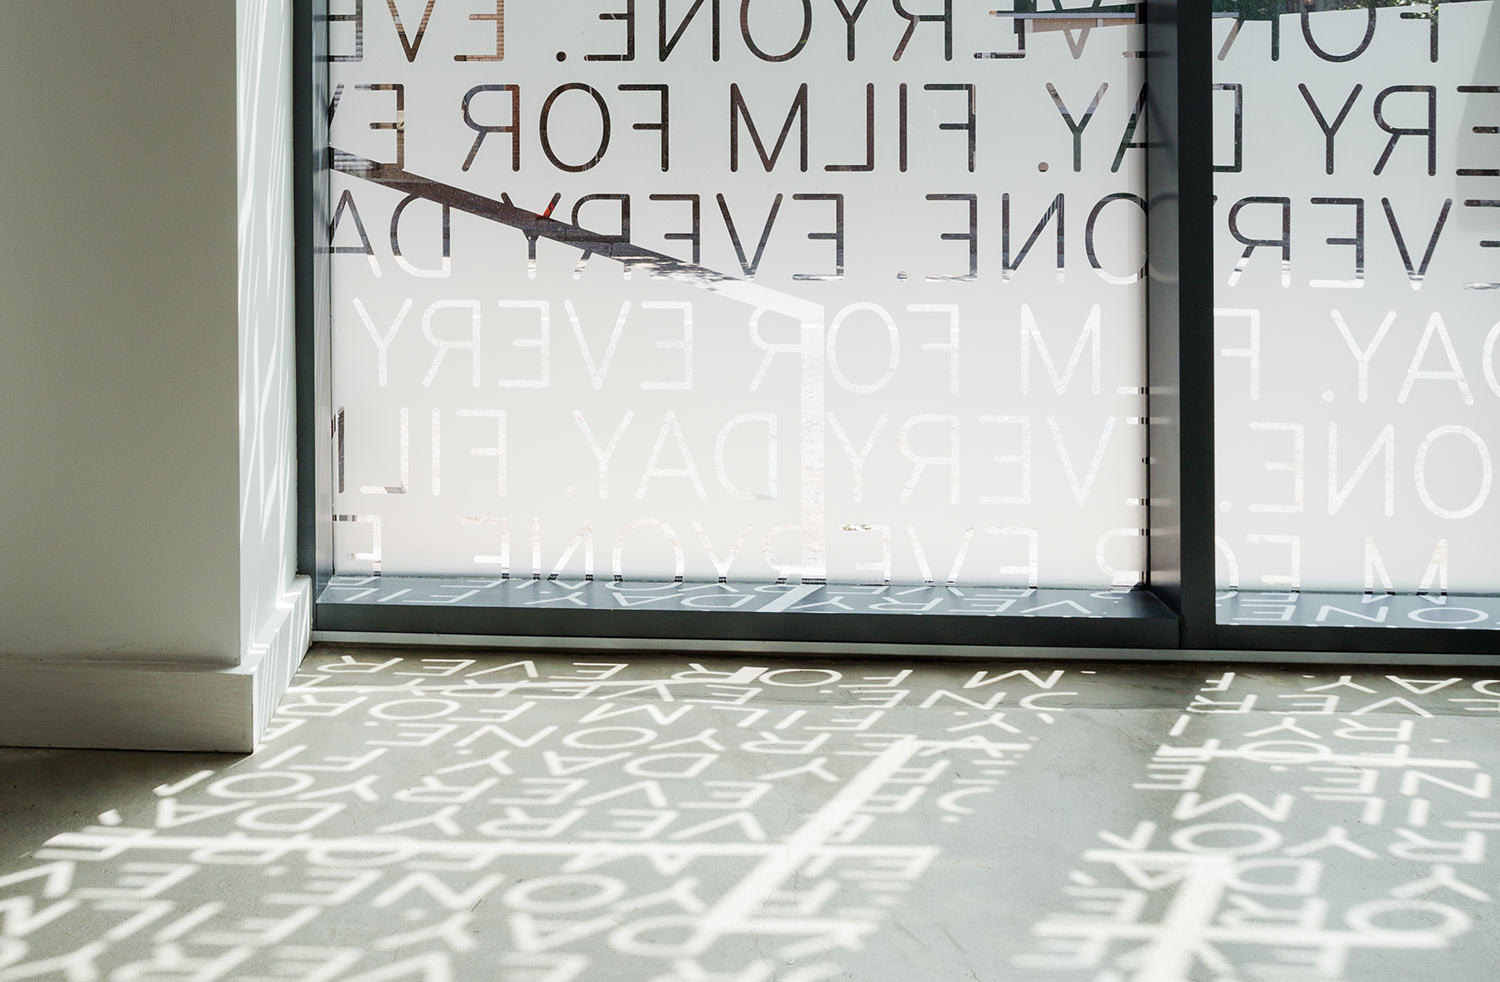 Light filters through the windows of the Parkway, casting shadows of typography on the floor